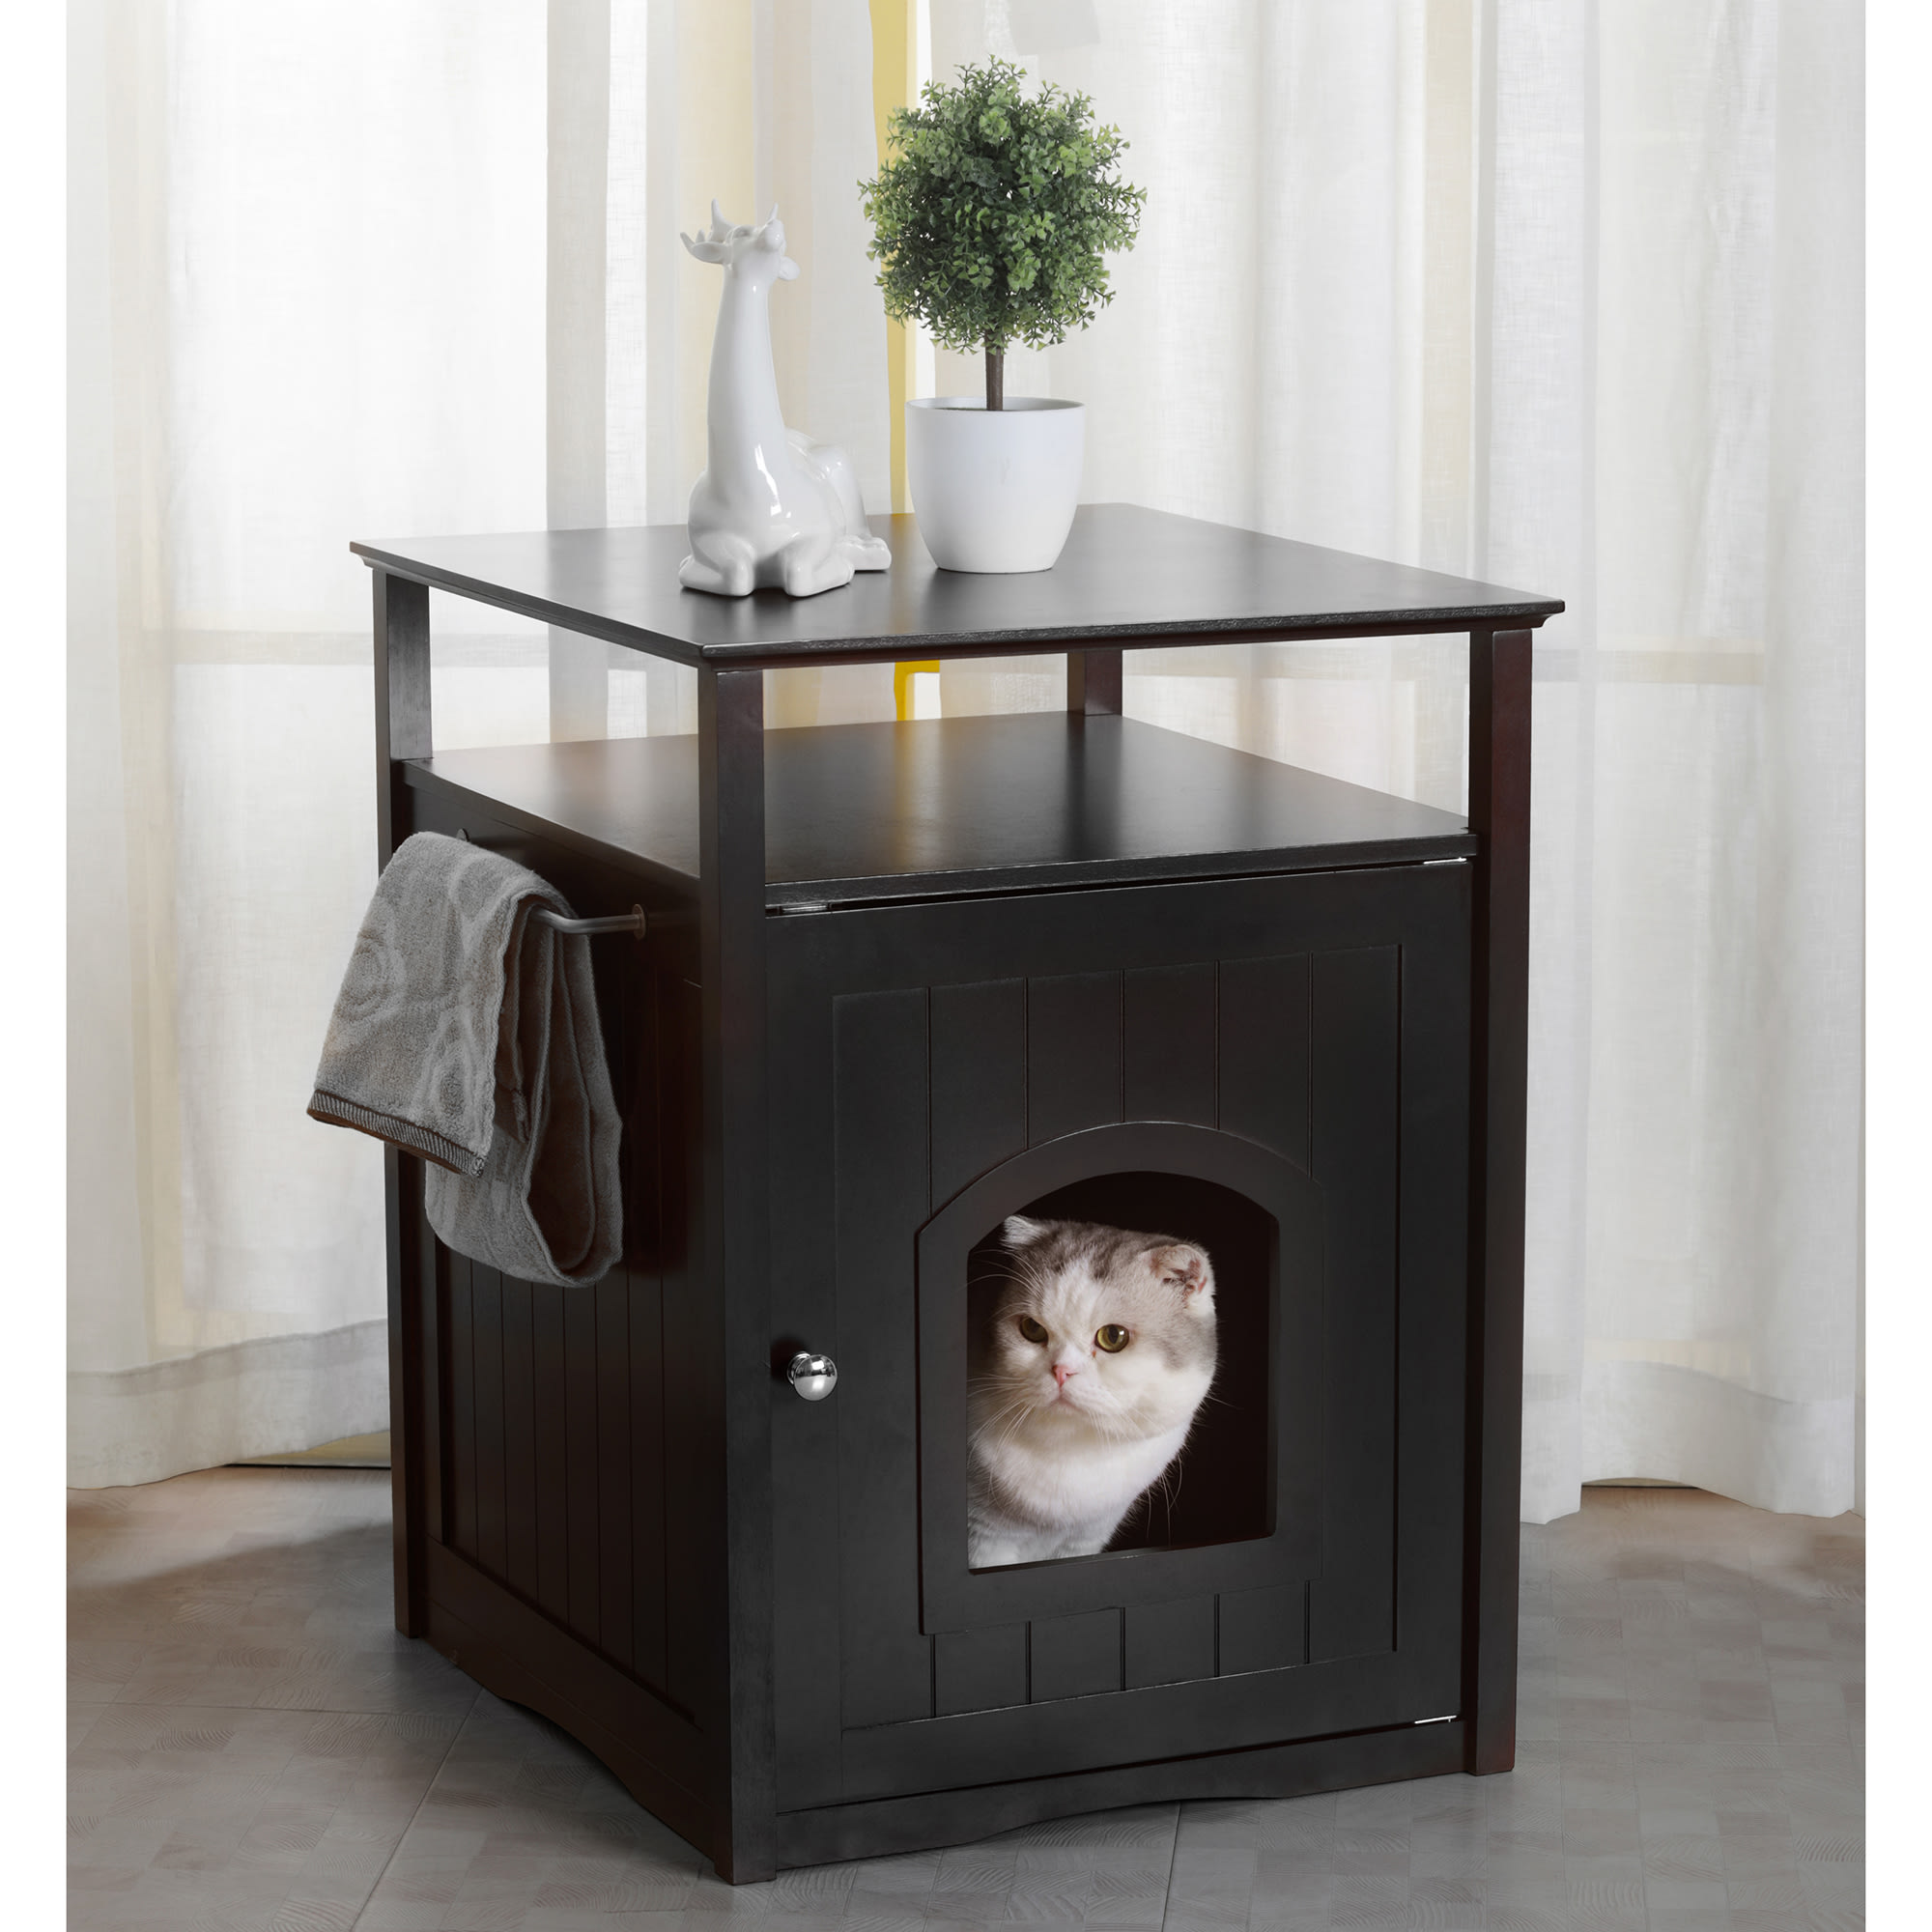 Photos - Other for Cats Zoovilla Zoovilla Cat Washroom Litter Box Cover / Night Stand Black Pet Ho